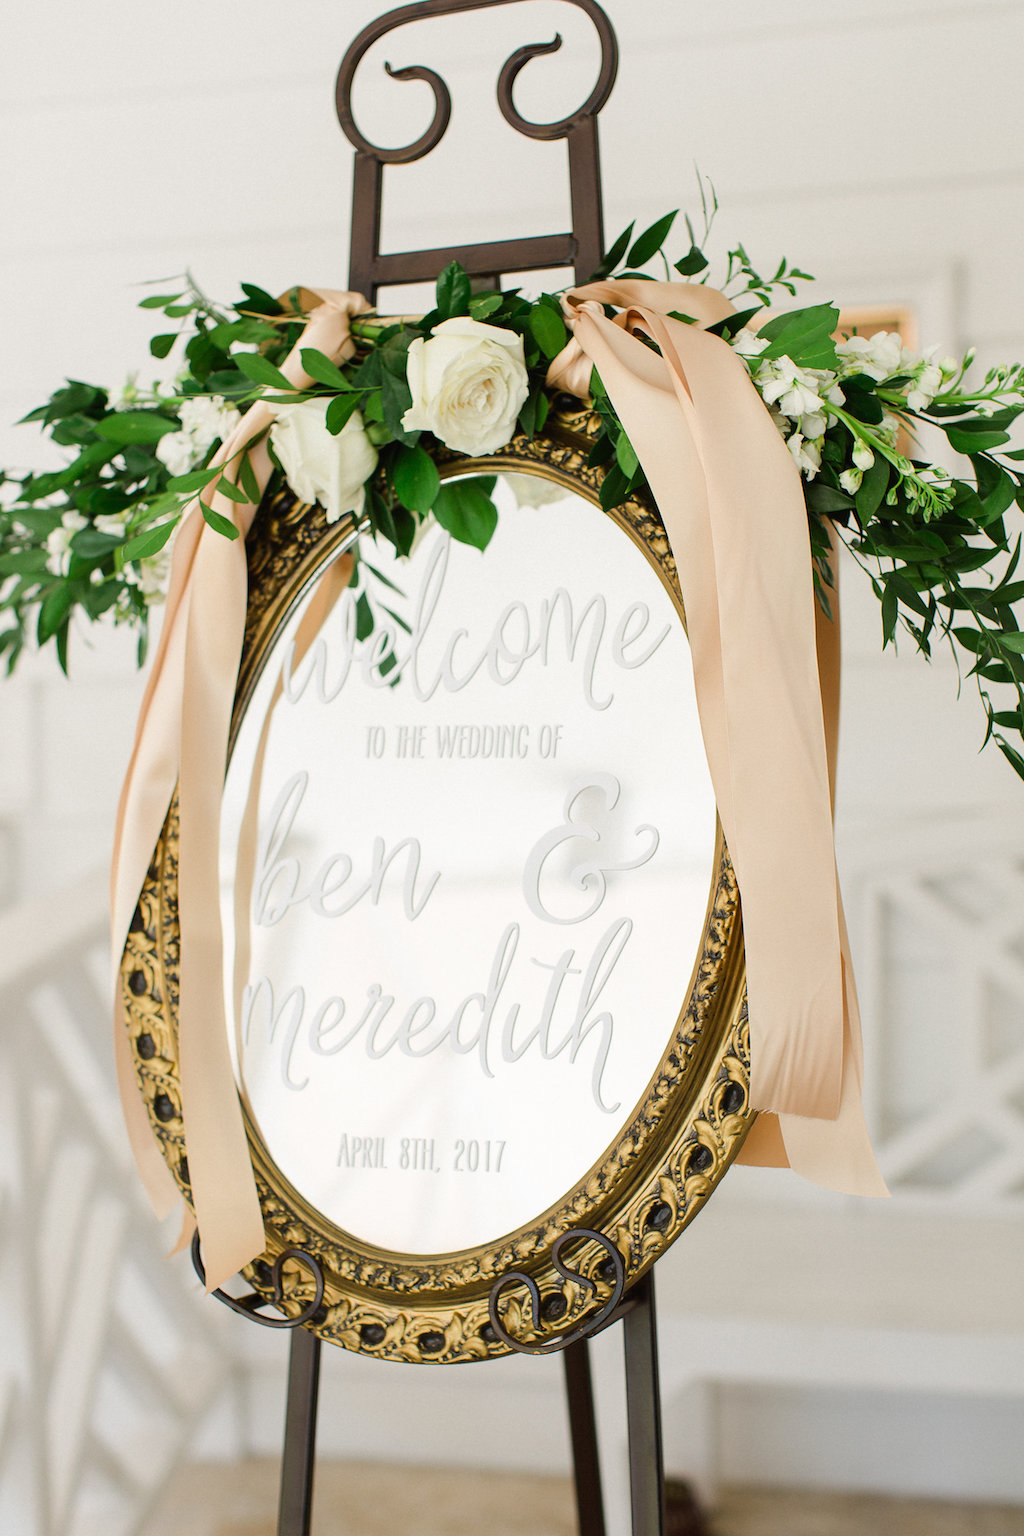 Old Florida Inspired Wedding Reception Welcome Sign on Vintage Gold Mirror with White Rose and Greenery Floral Garland with Long Gold Ribbons | Tampa Bay Wedding Planner Glitz Events